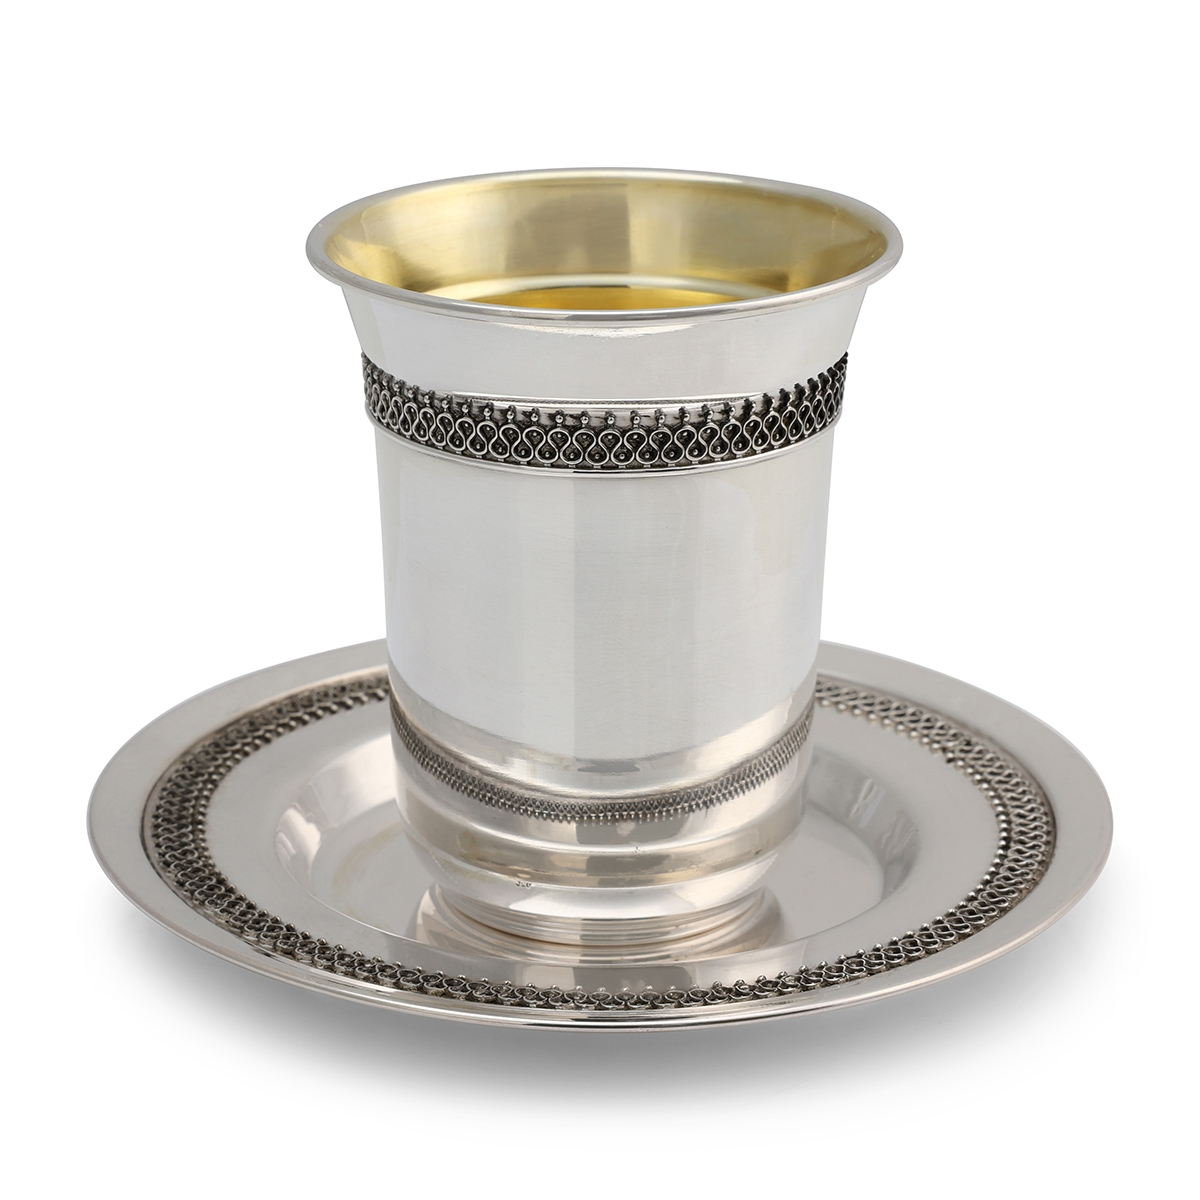 Handcrafted Sterling Silver Polished Kiddush Cup With Filigree Design By Traditional Yemenite Art - 1